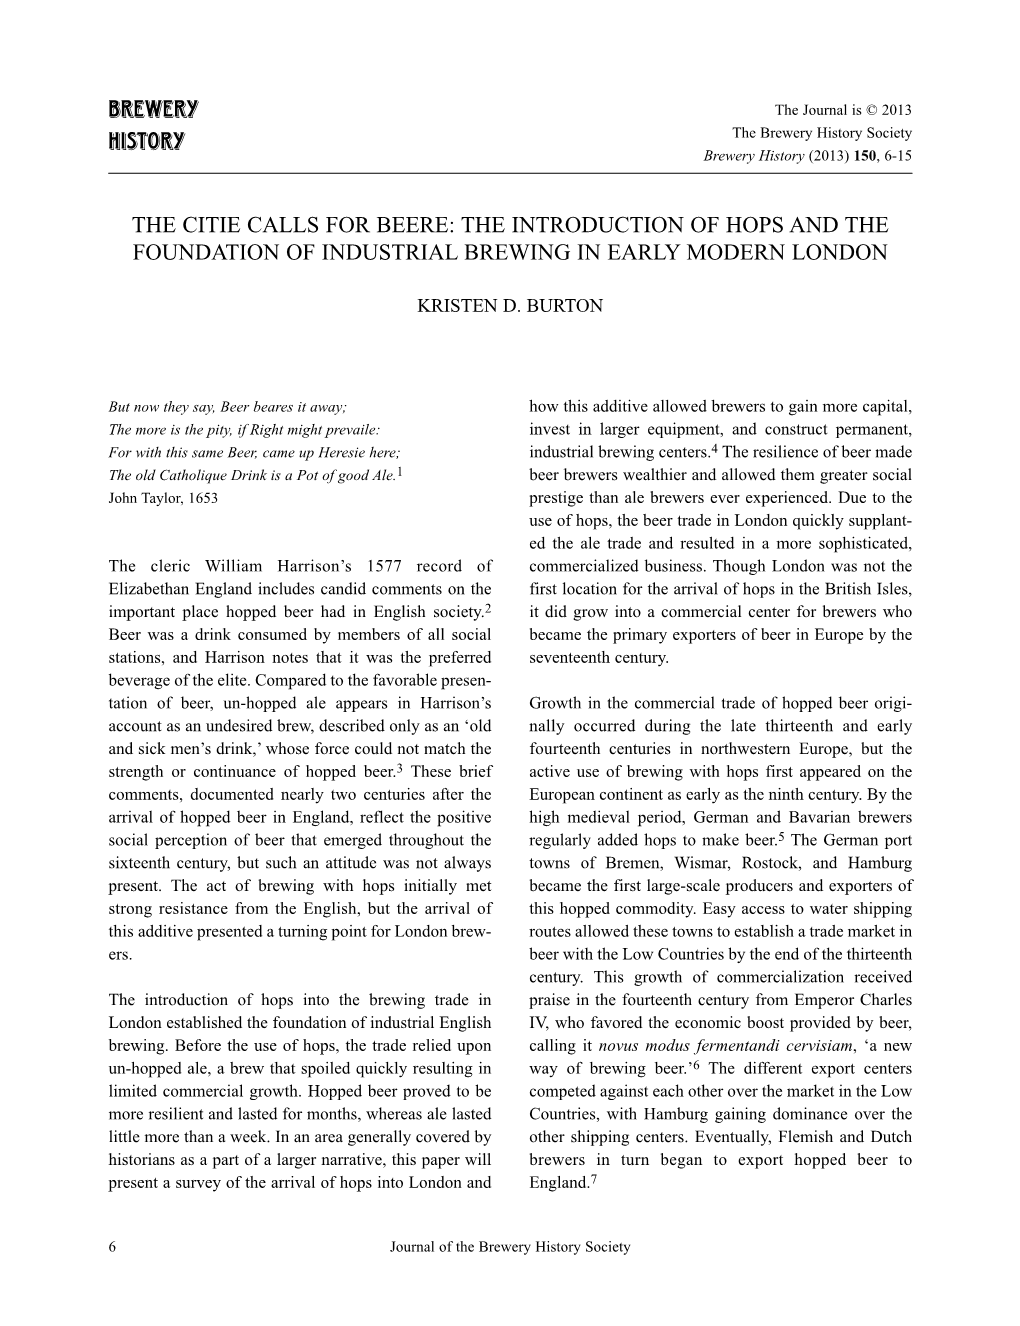 The Citie Calls for Beere: the Introduction of Hops and the Foundation of Industrial Brewing in Early Modern London